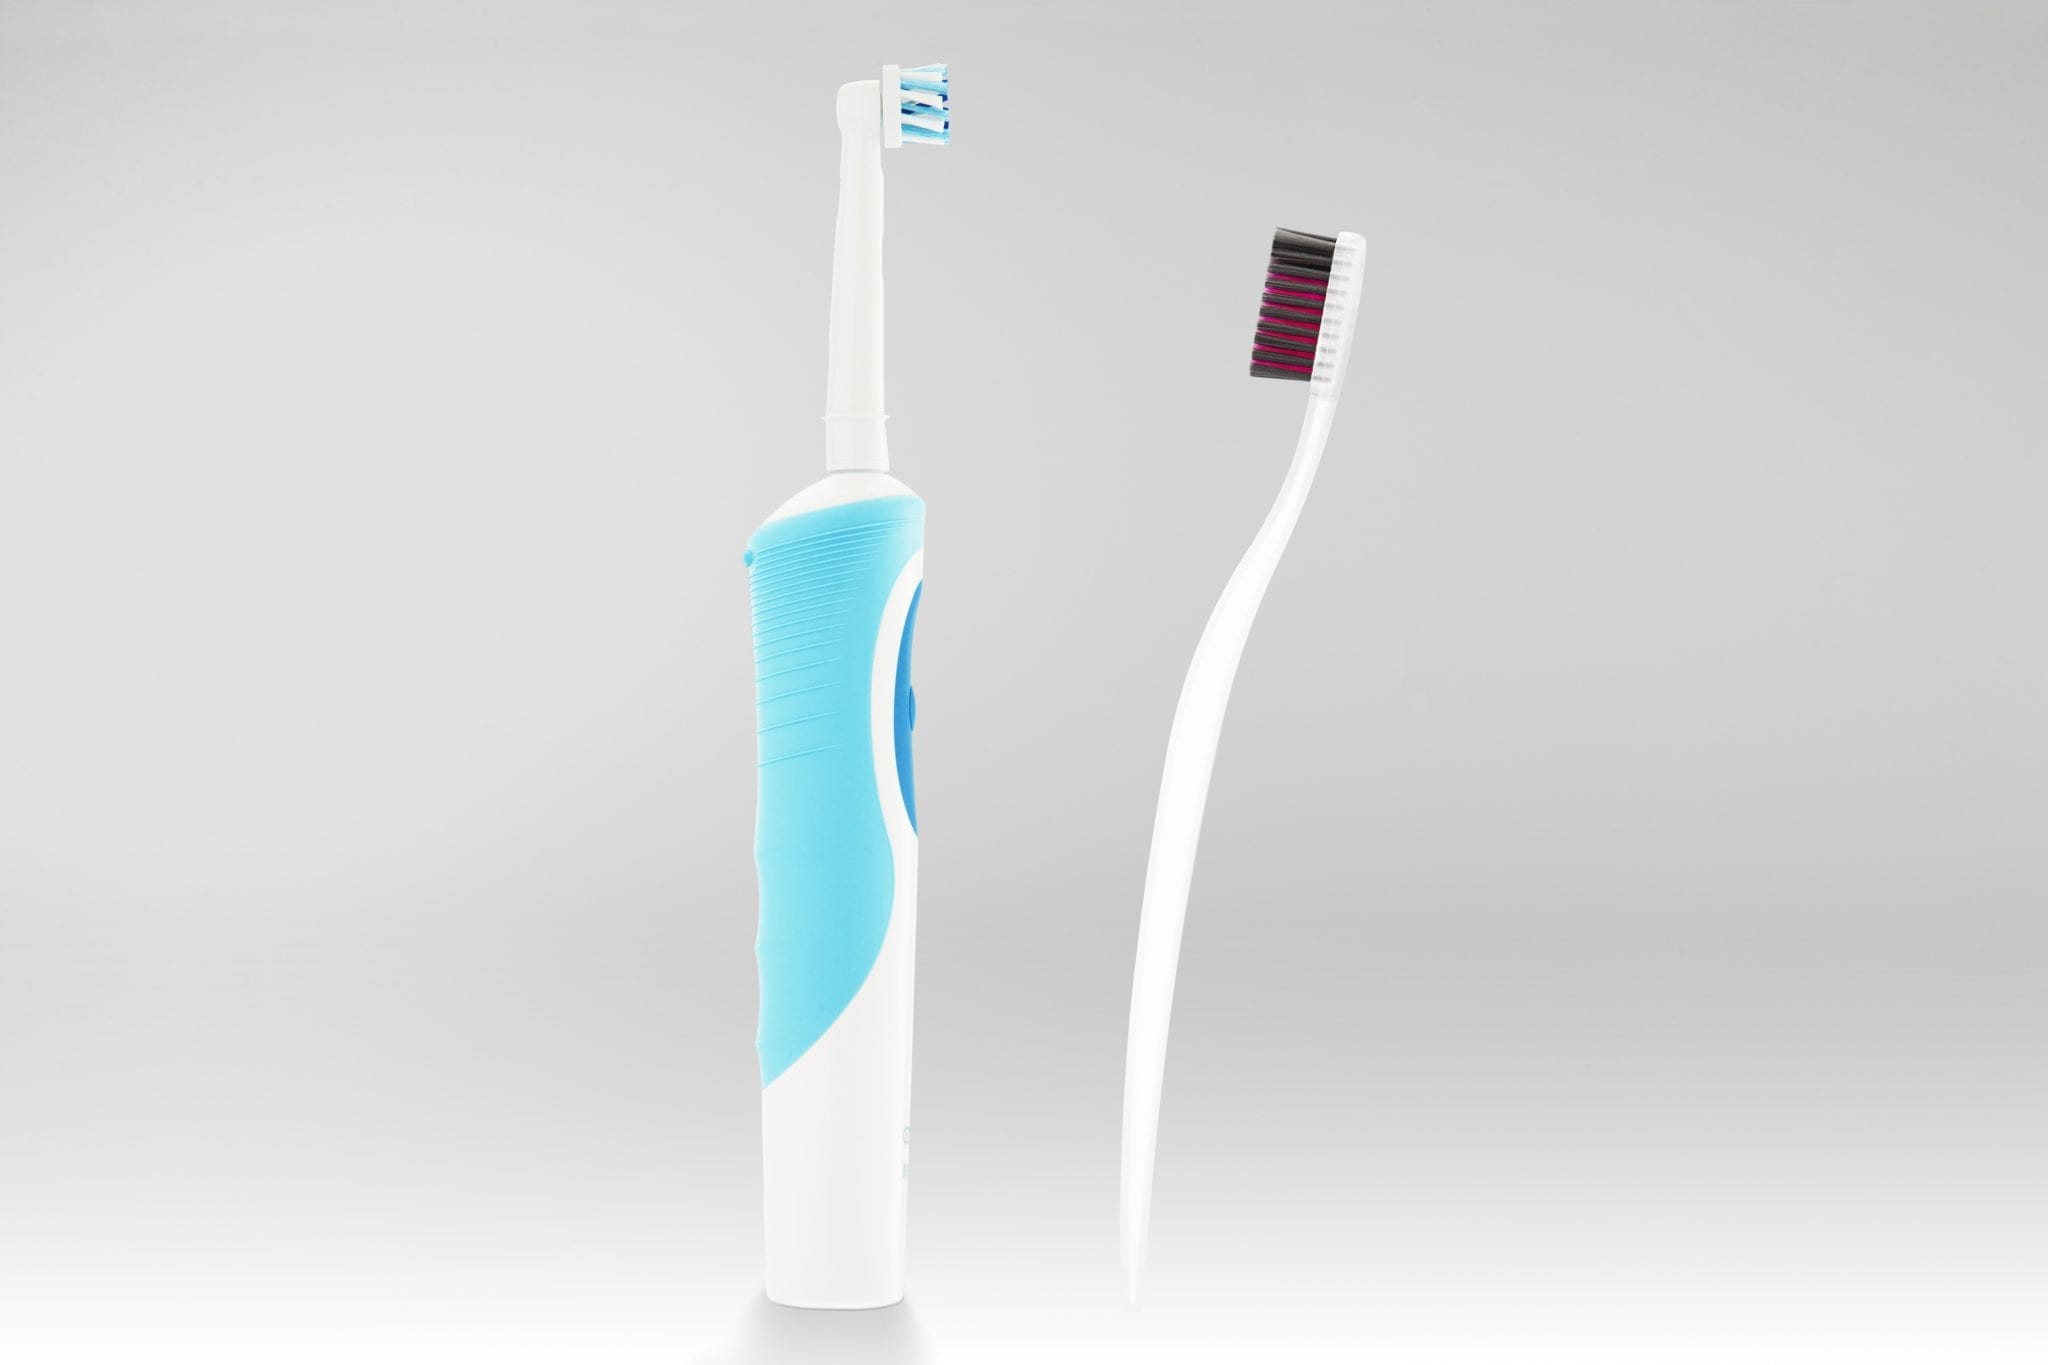 An electric toothbrush and a regular toothbrush